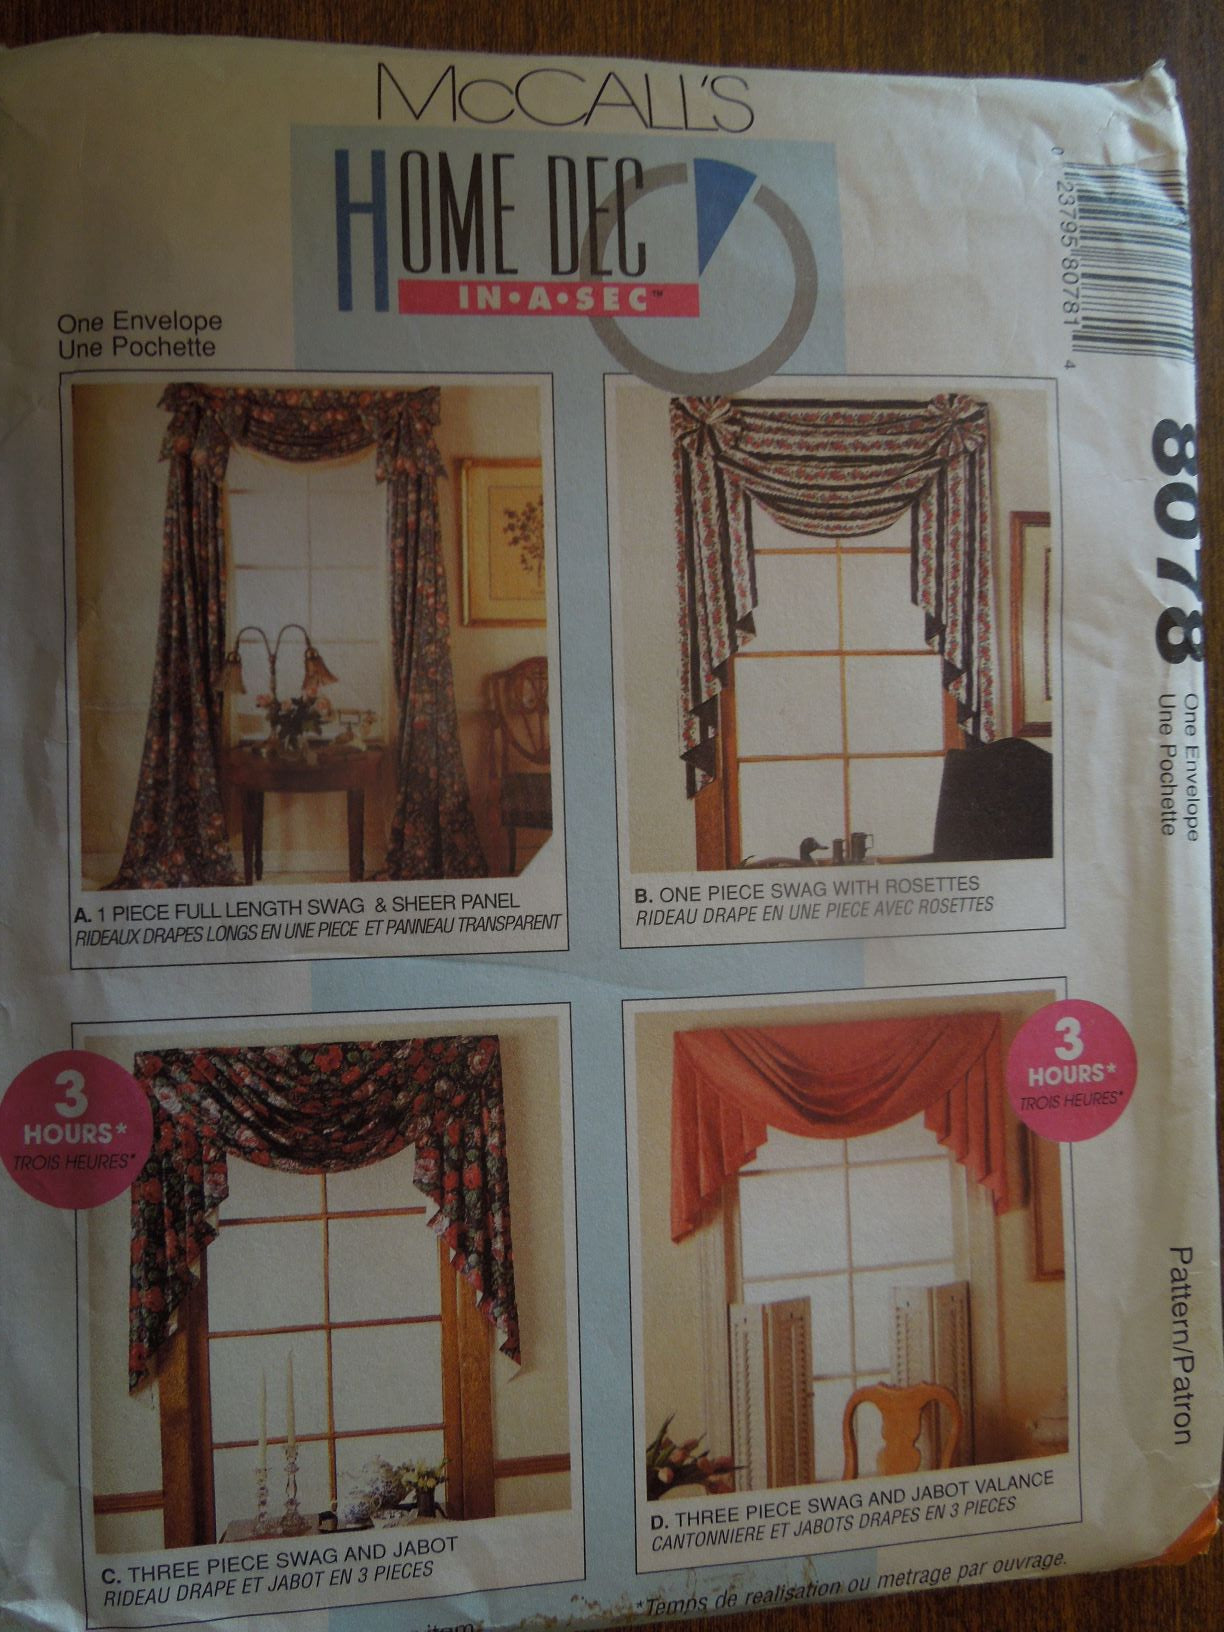 Sewing Pattern for Window Valances and Curtain Panels, Mccall's